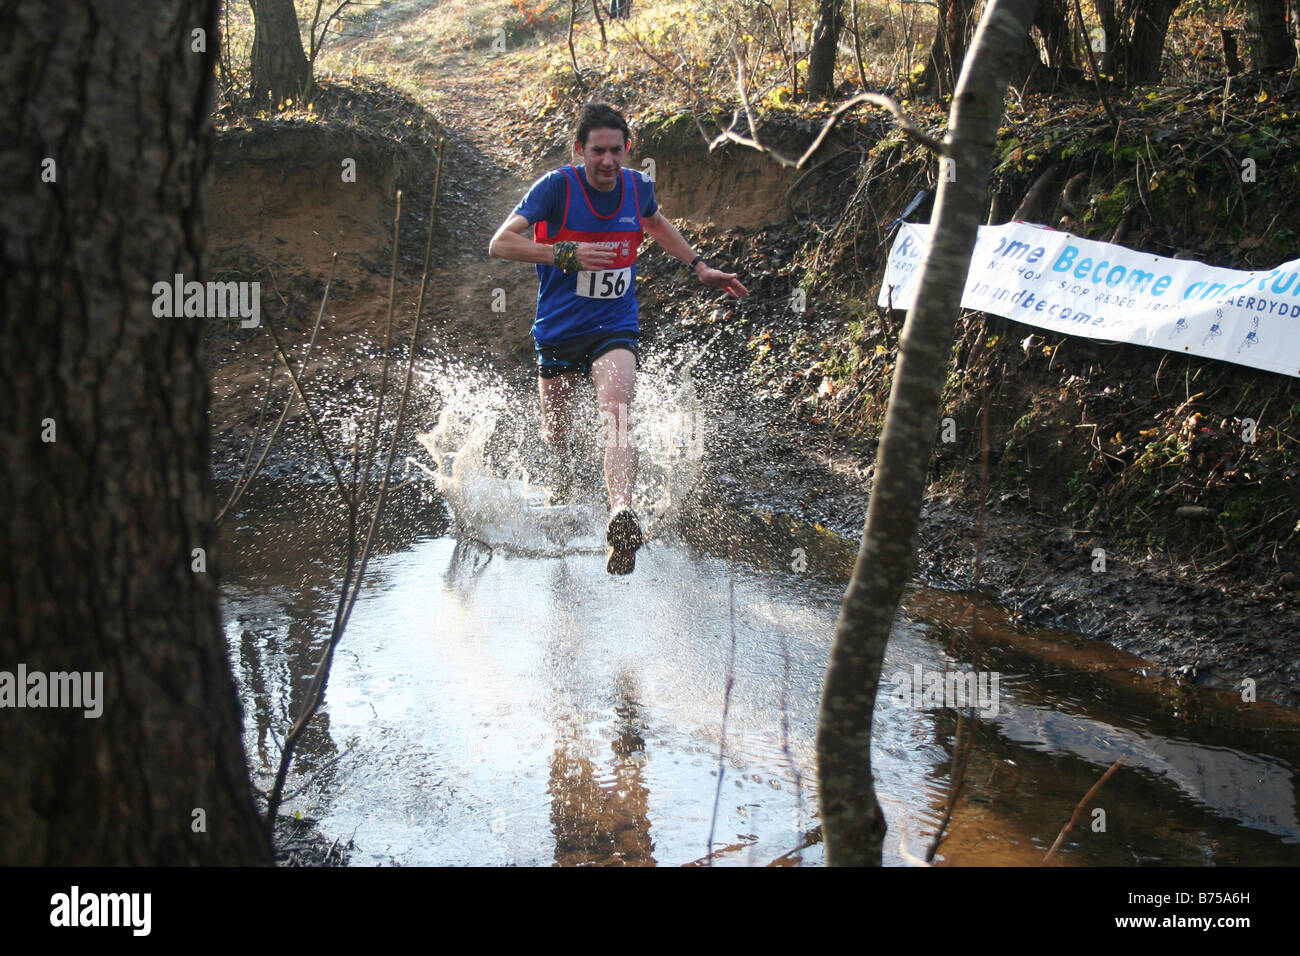 Runner in the Xmas Pud race Merthyr Mawr Mid Glamorgan South Wales Stock Photo